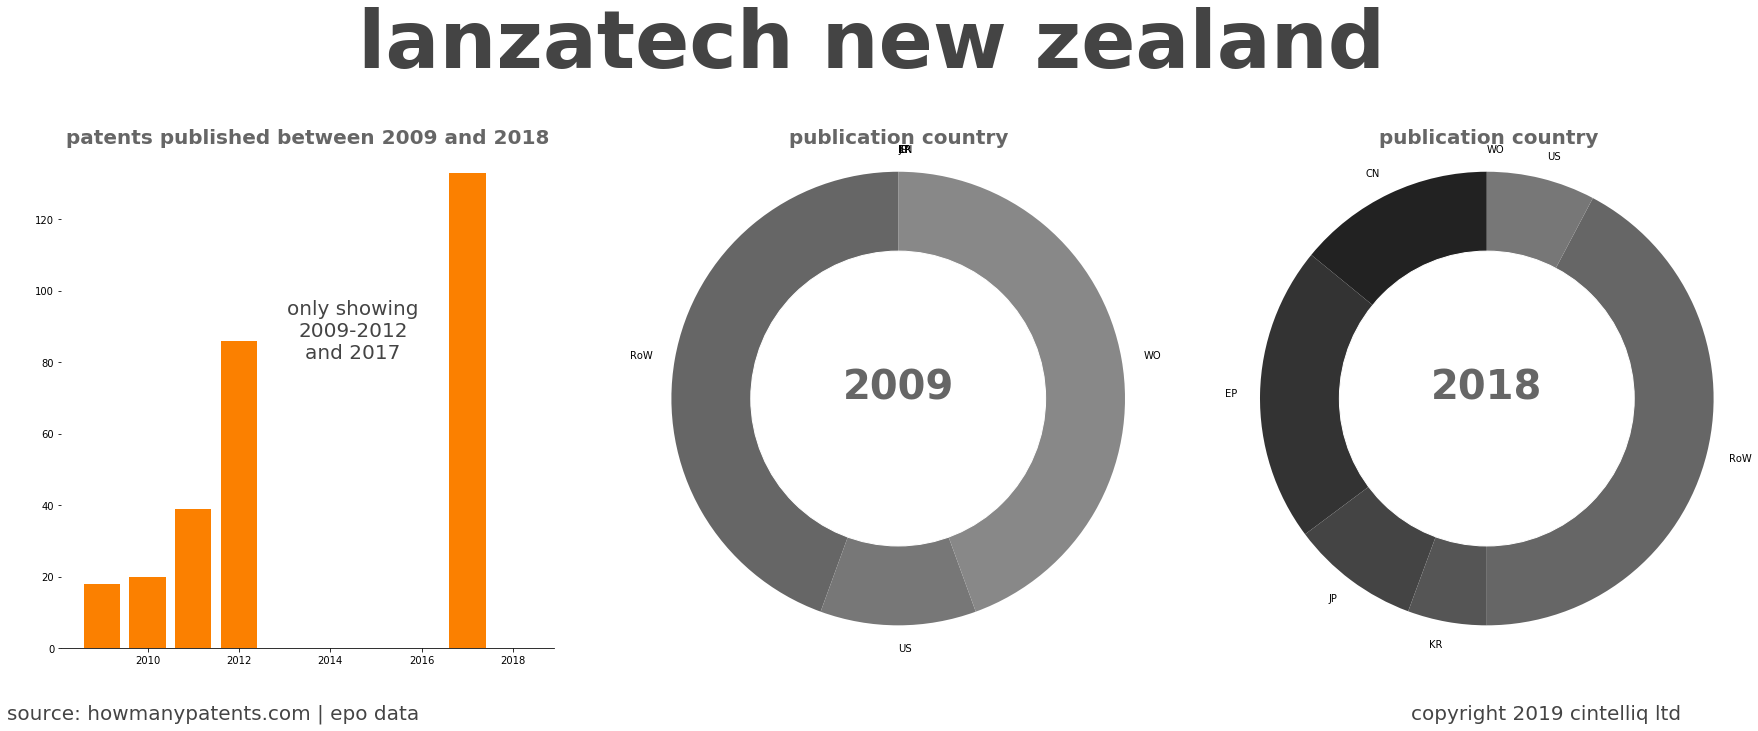 summary of patents for Lanzatech New Zealand